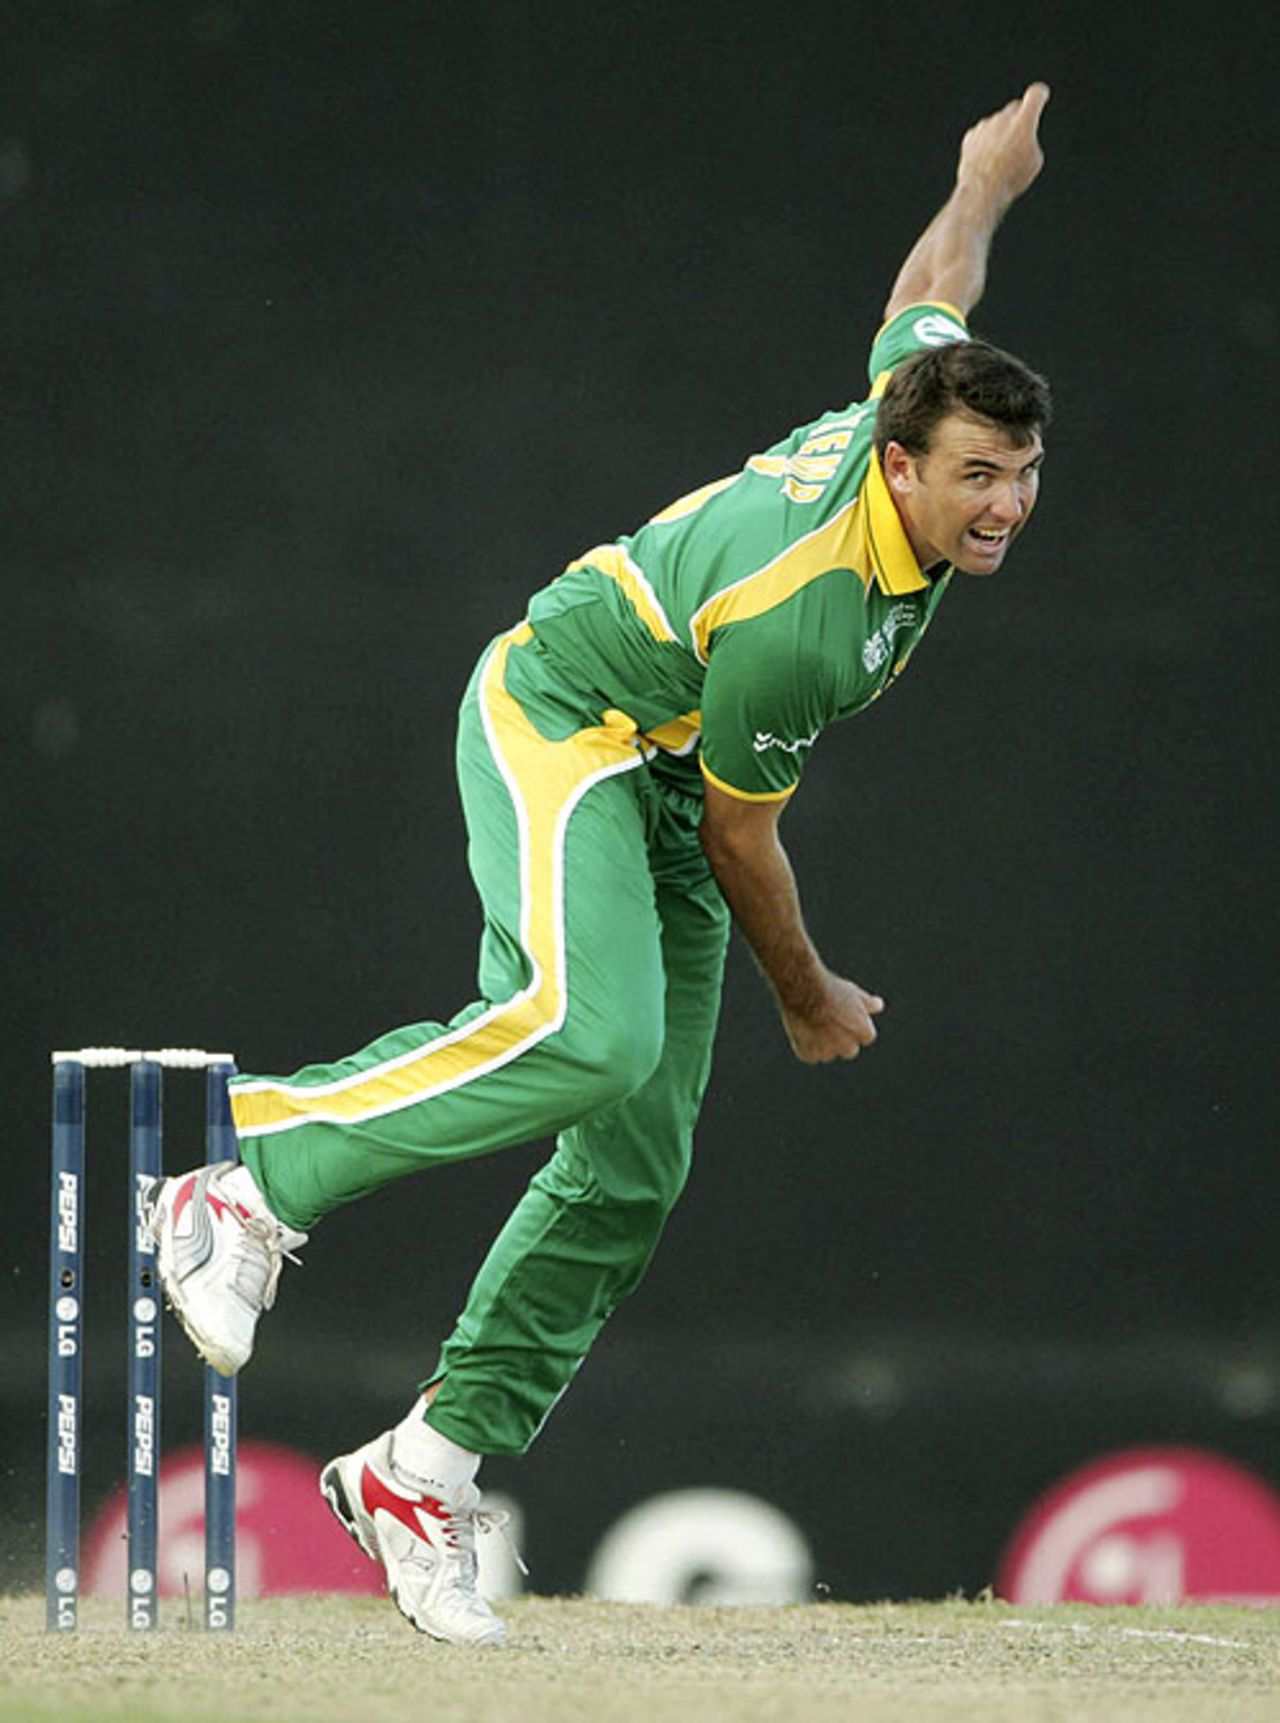 Justin Kemp didn't get a bat, but he did pick up two wickets, Netherlands v South Africa, Group A, St Kitts, March 16, 2007